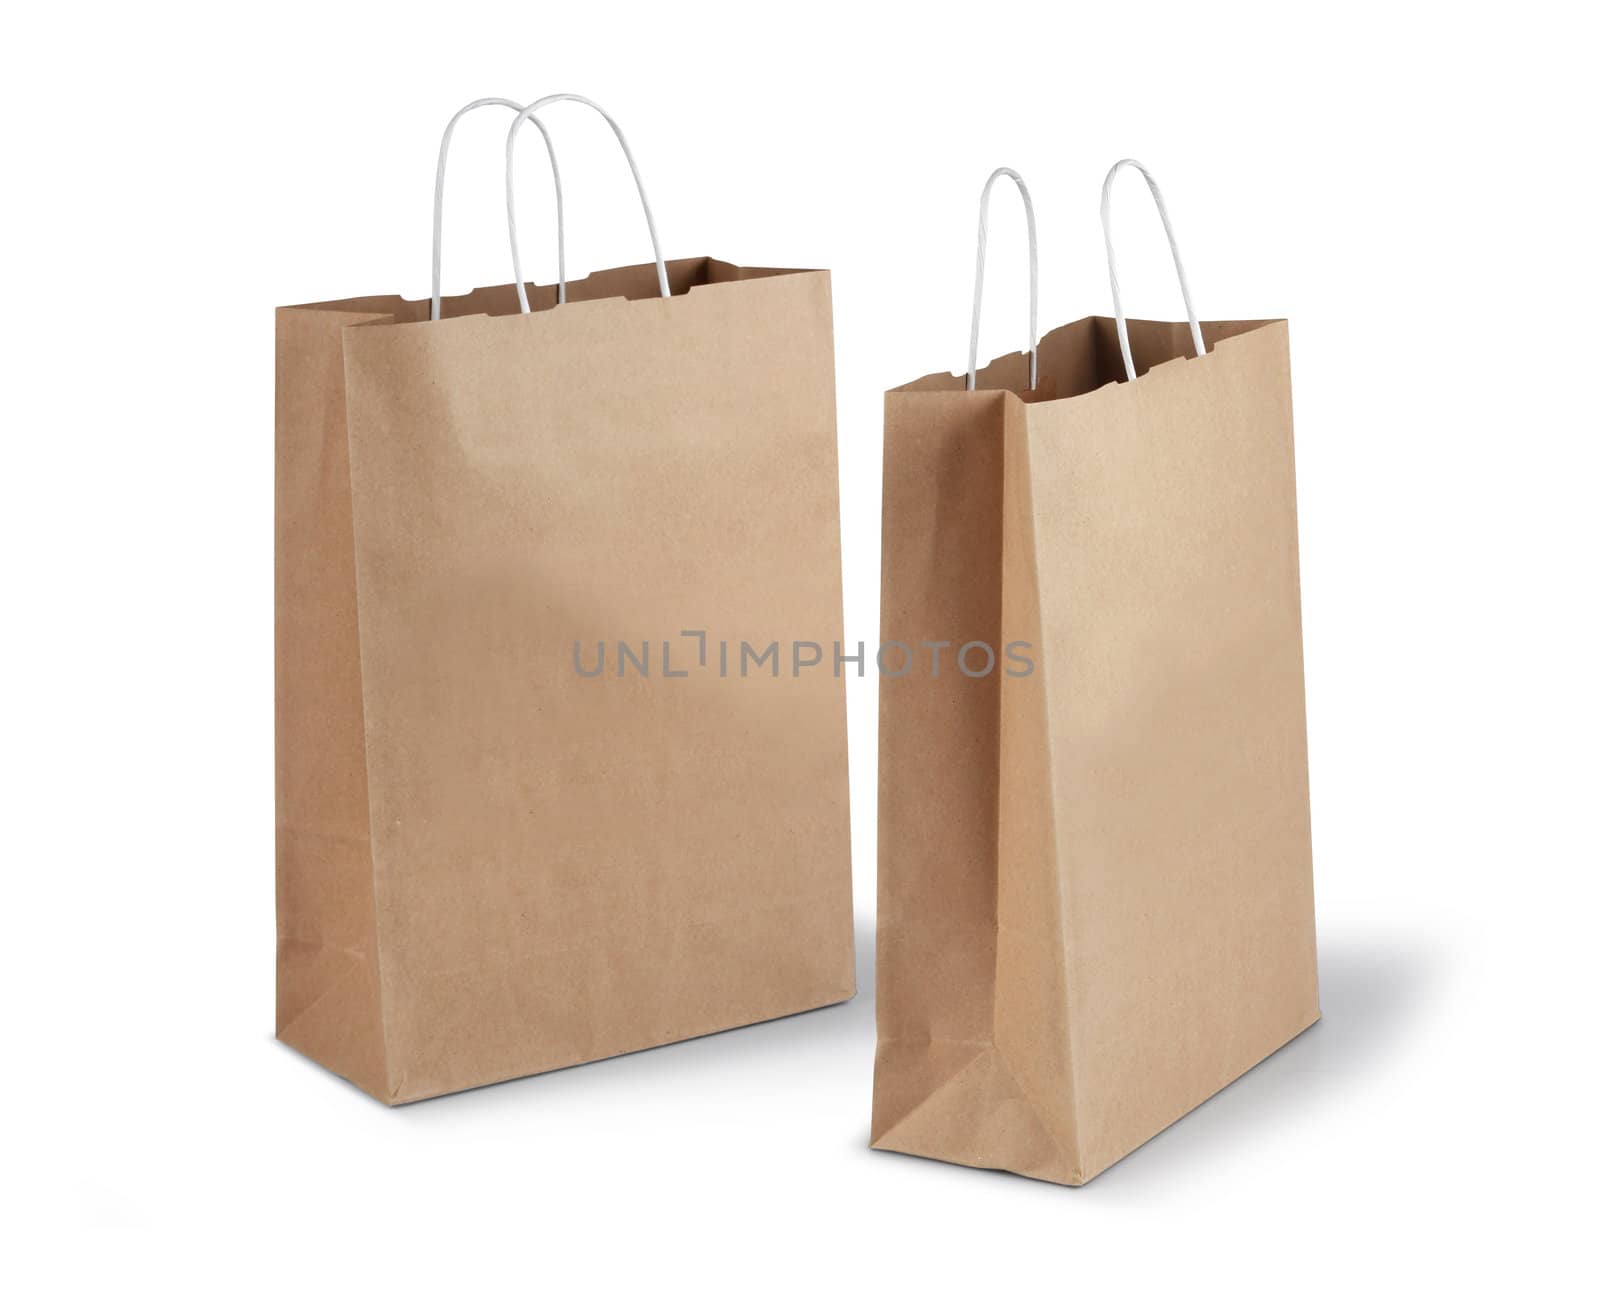 Two brown paper bags by anterovium